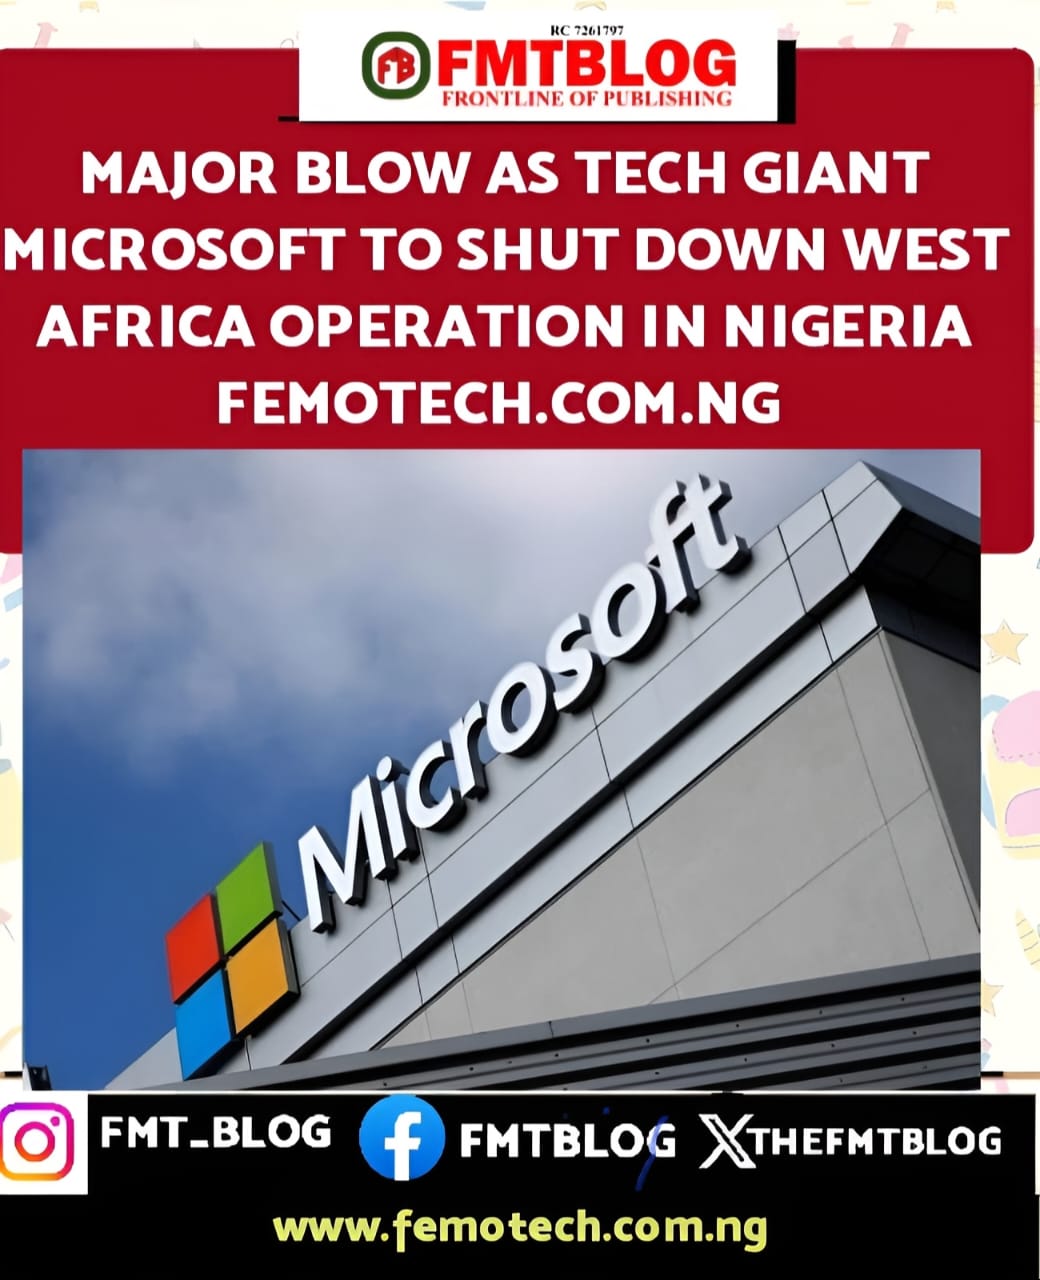 Major Blow As Tech Giant Microsoft To Shut Down West Africa Operation In Nigeria